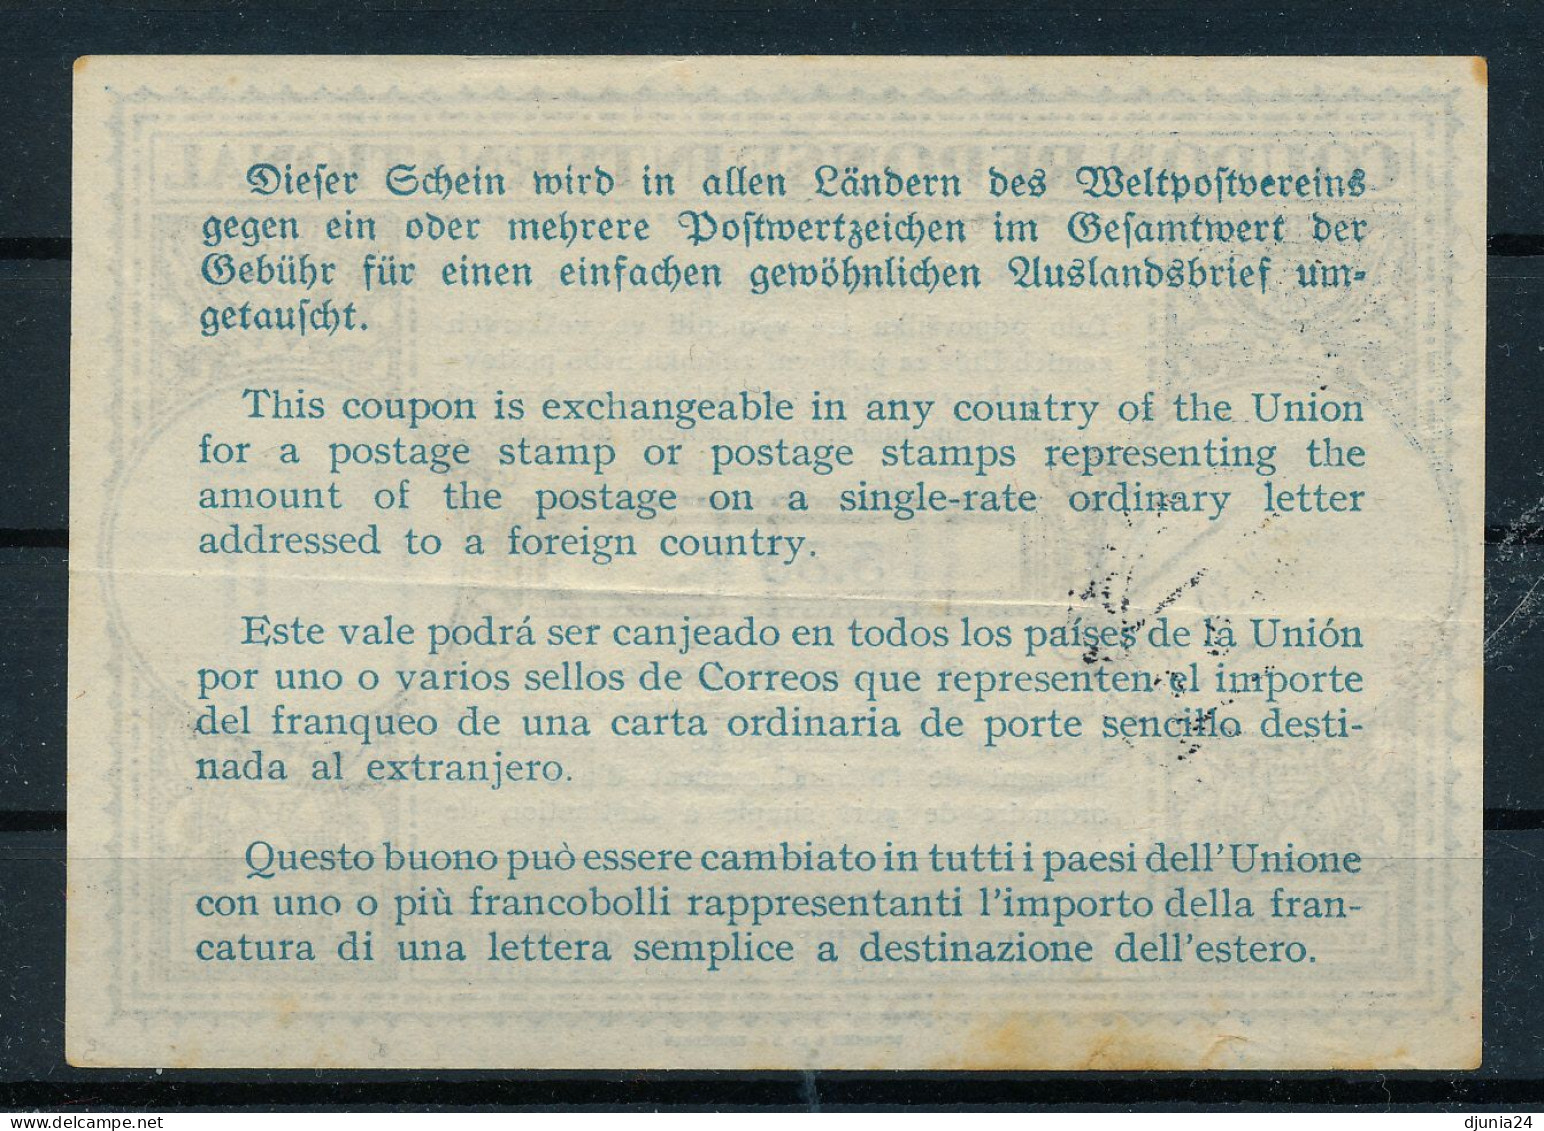 BF0064 / Tchéco-Slovaquie  -   19.IV.1939  ,  3.33 K.   ,  Type Lo12  -  Reply Coupon Reponse - Sin Clasificación